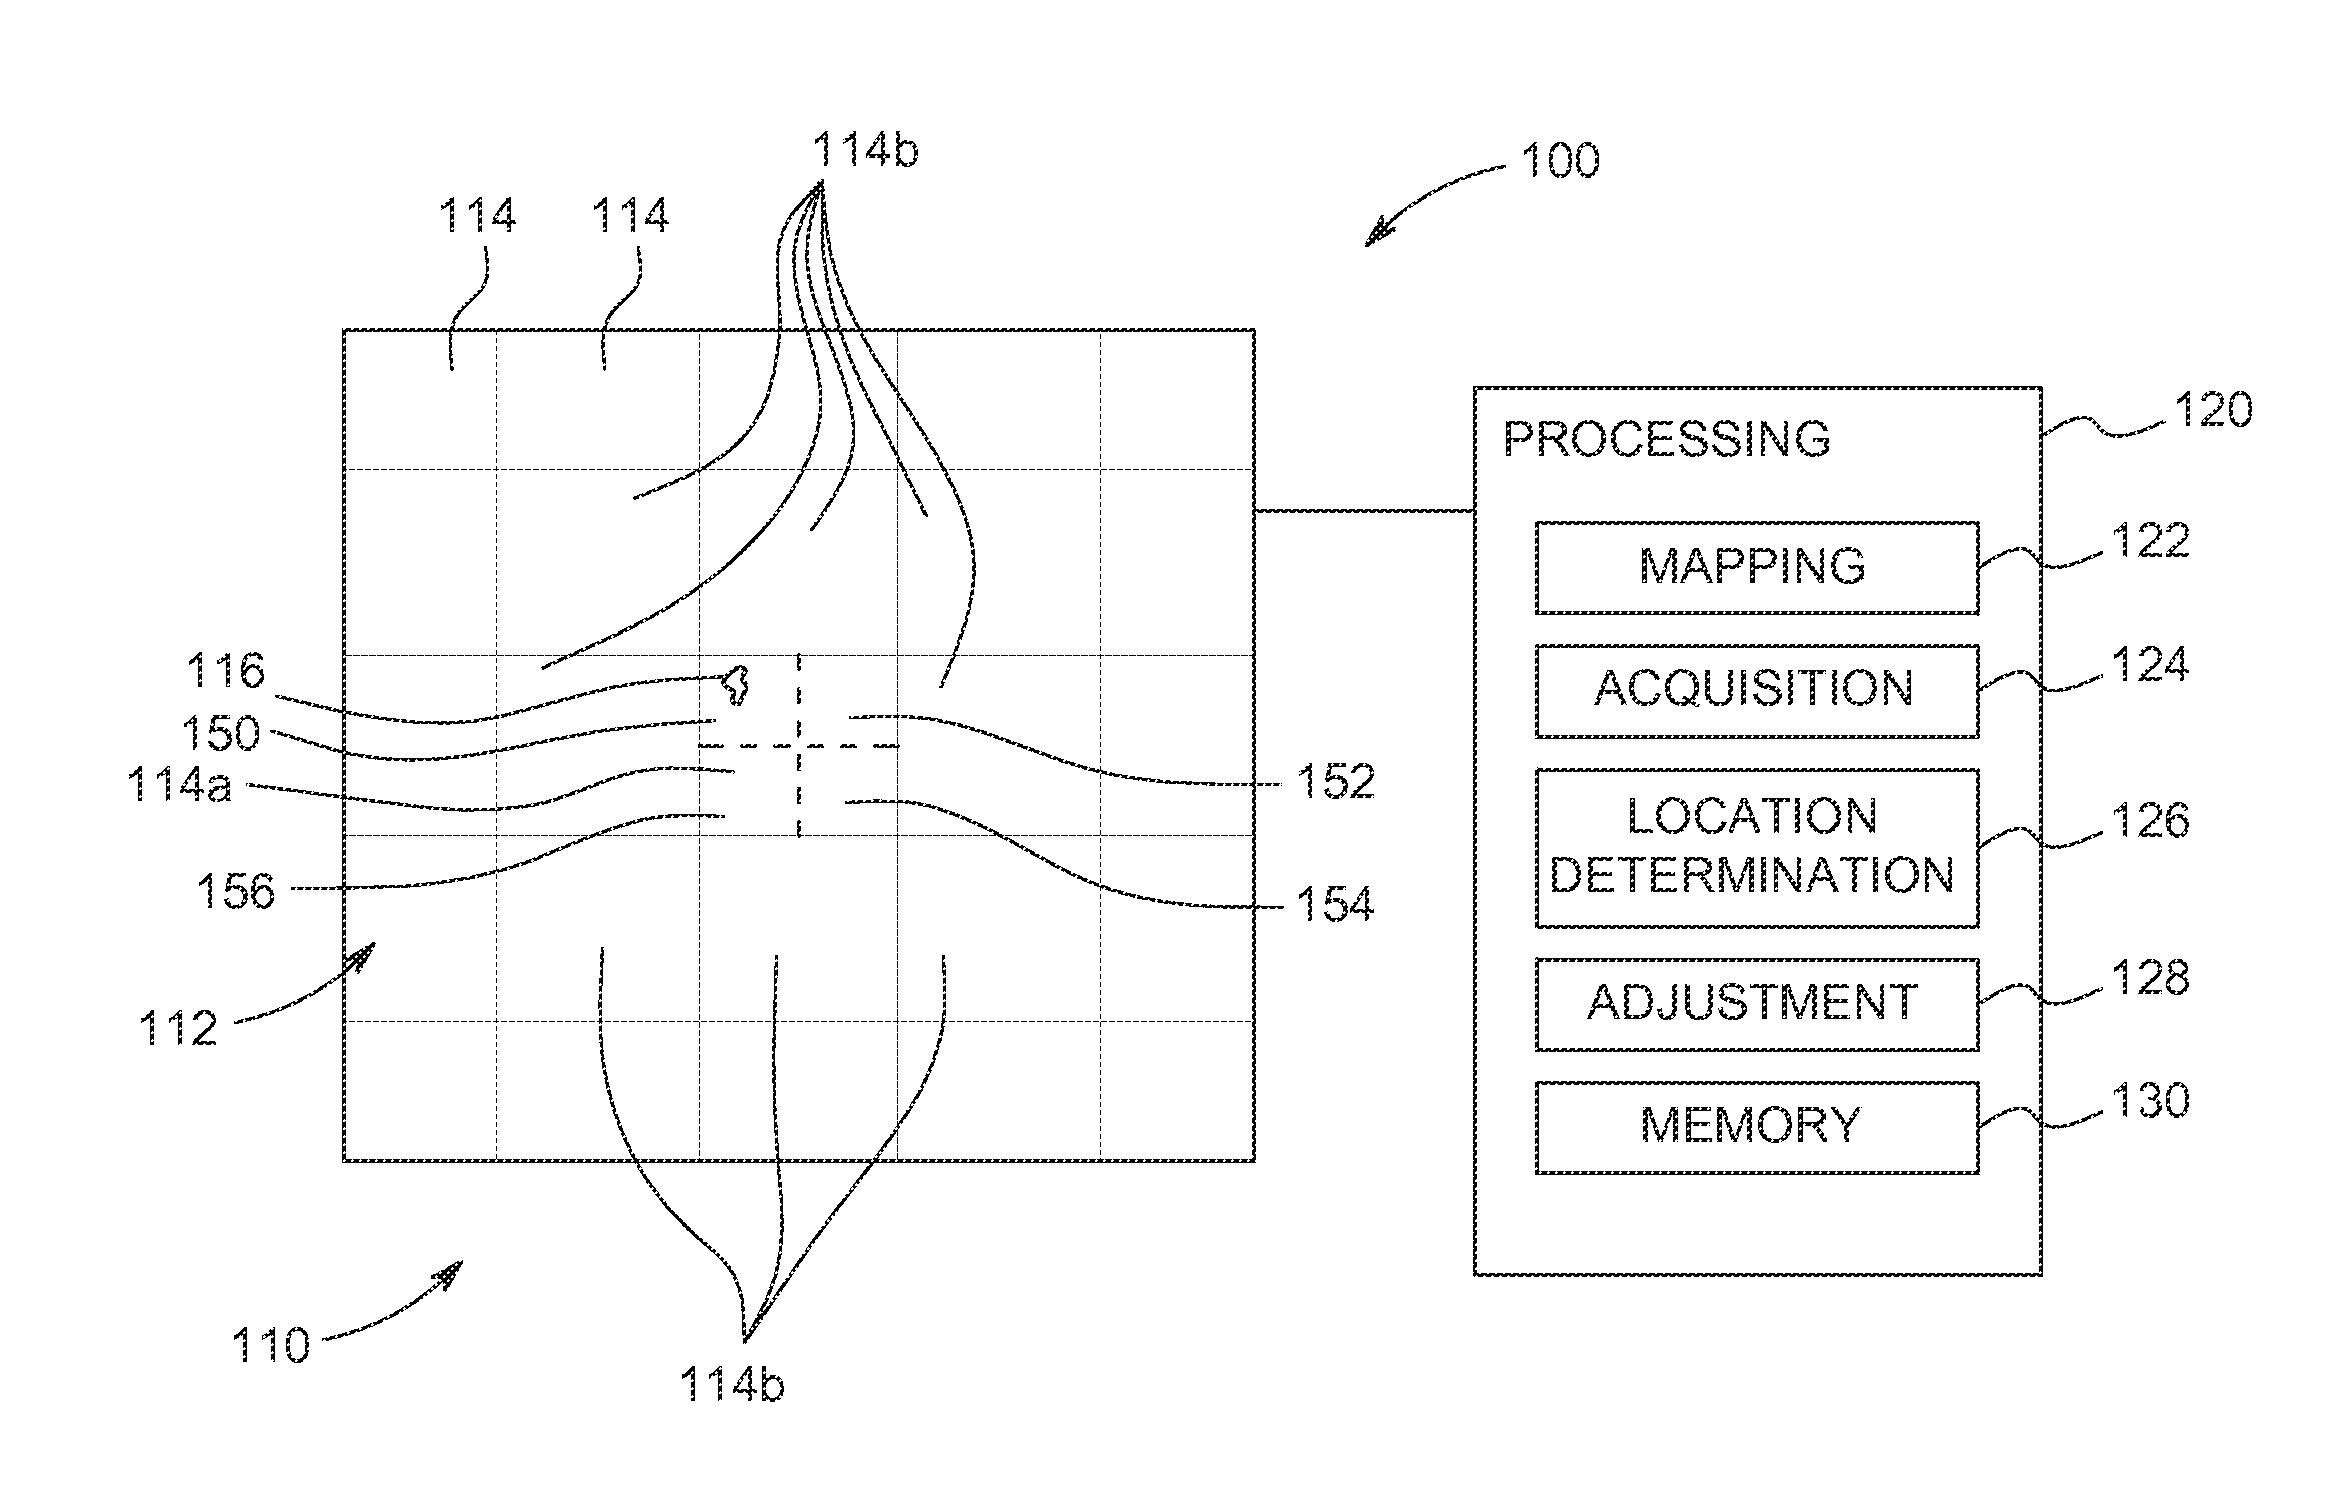 Systems and methods for improving energy resolution by sub-pixel energy calibration